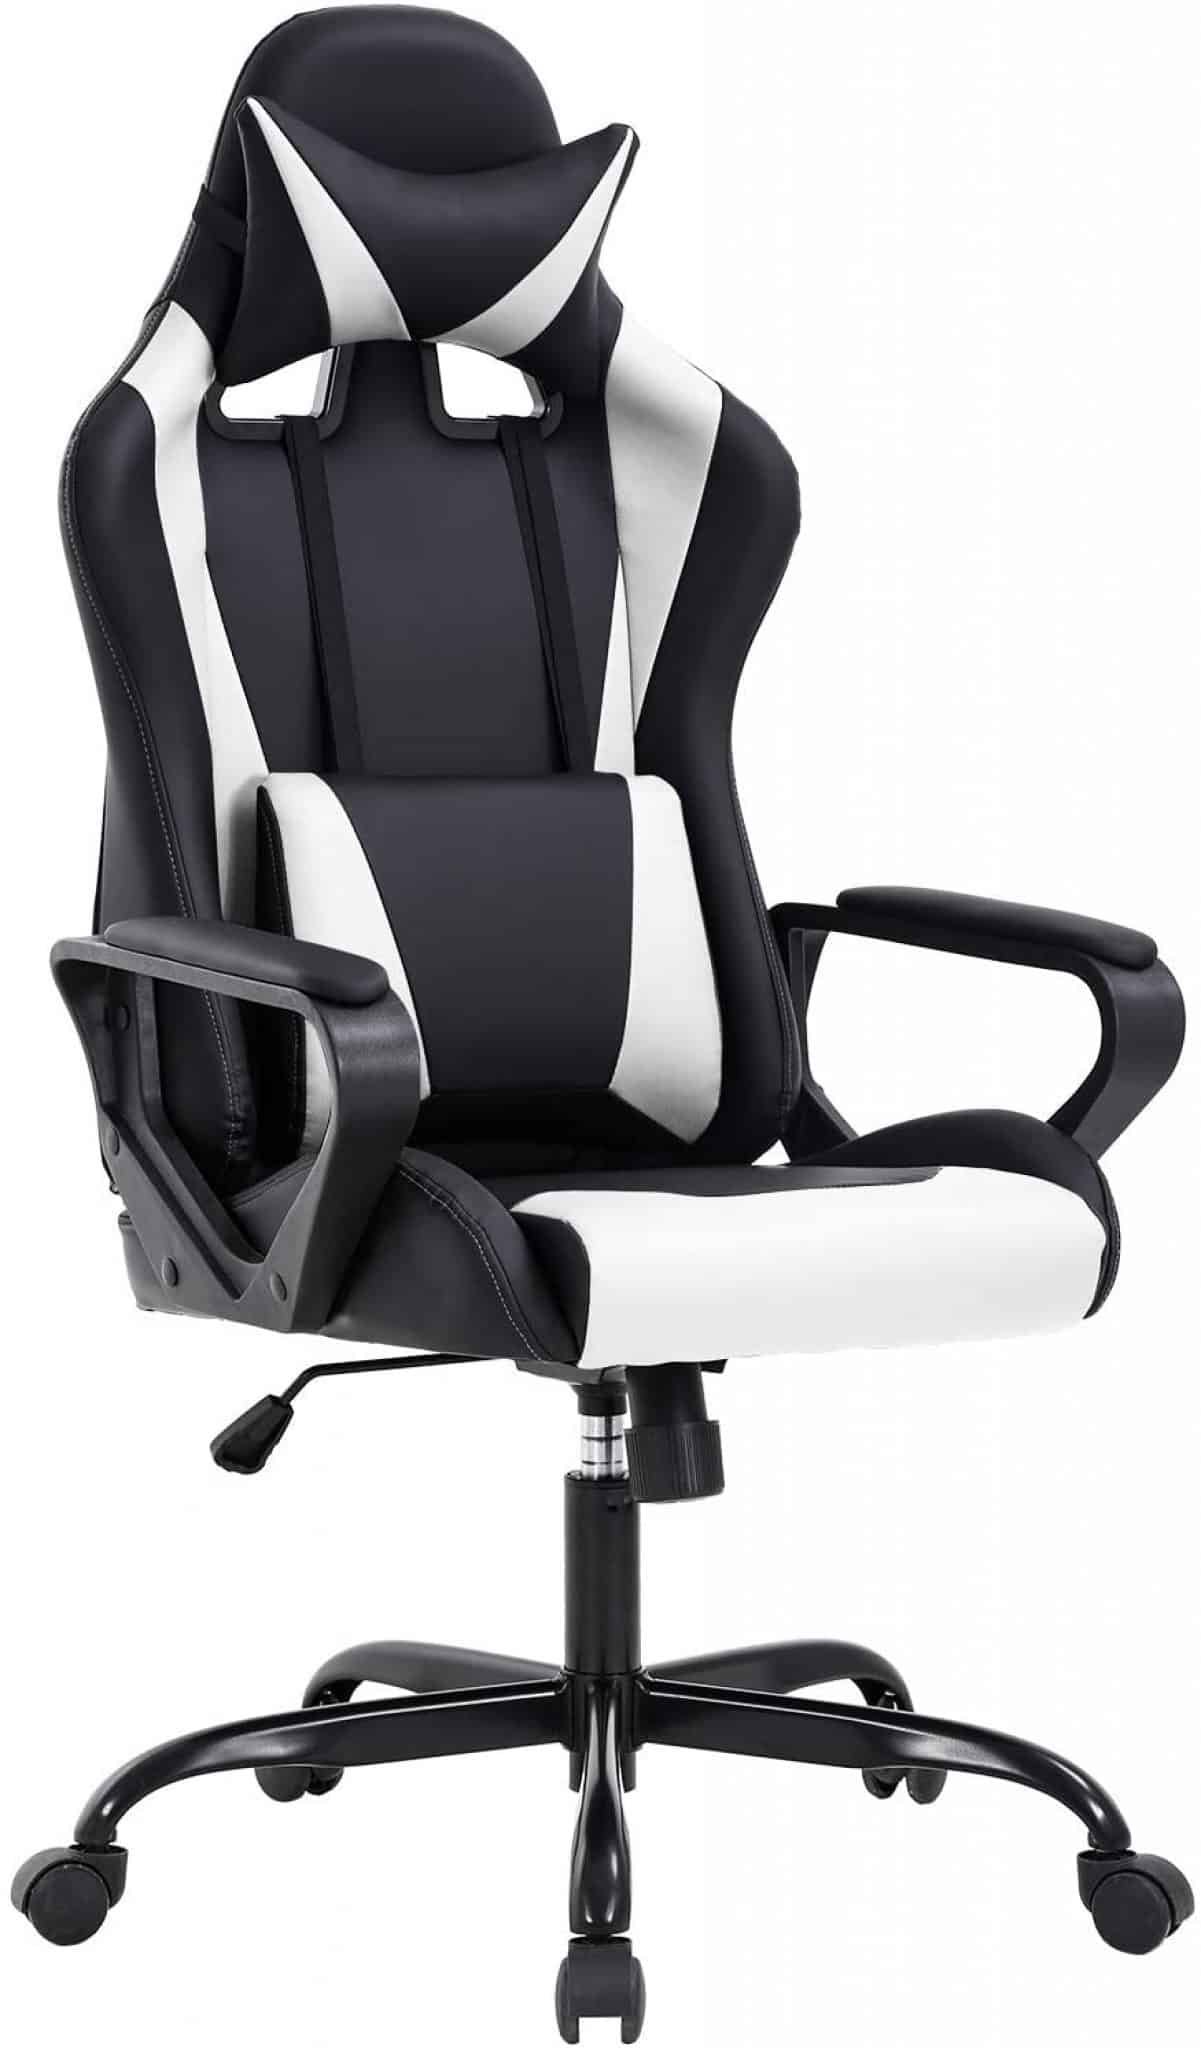 10 Best Budget Gaming Chairs under $150 2022 - GPCD